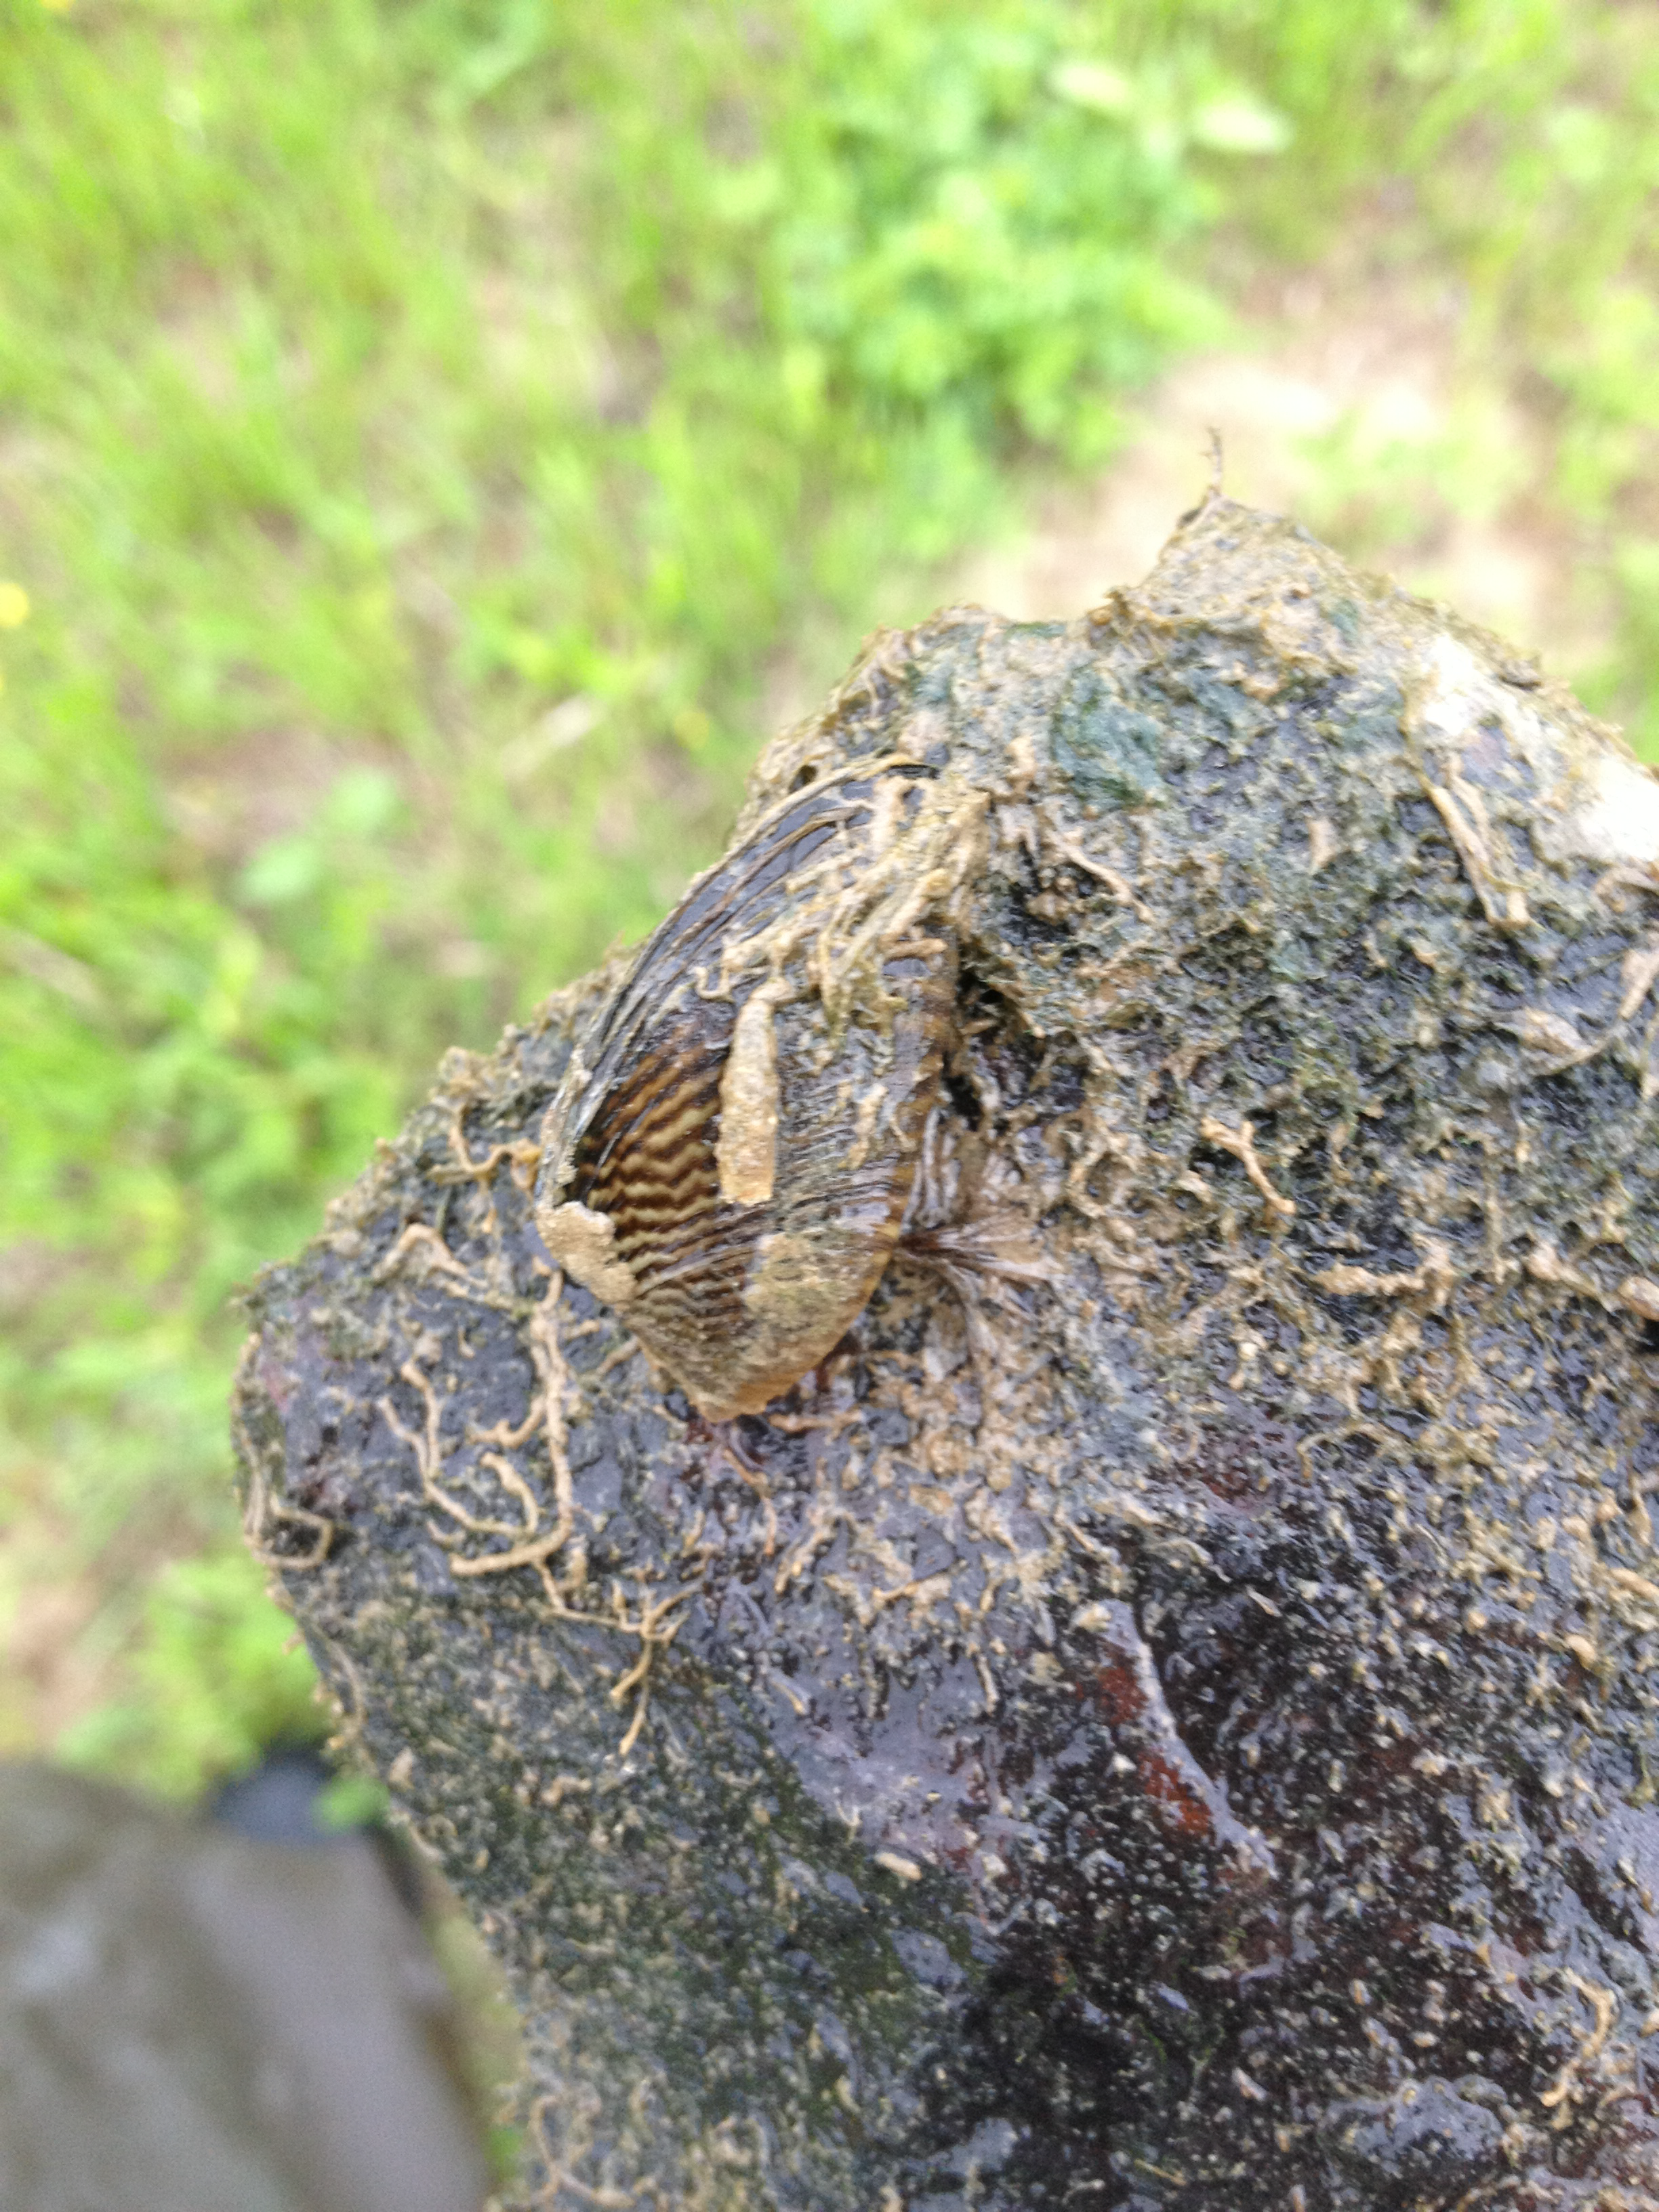 Zebra mussel in the center of the picture, attached to a rock.  Bright green grass in the background